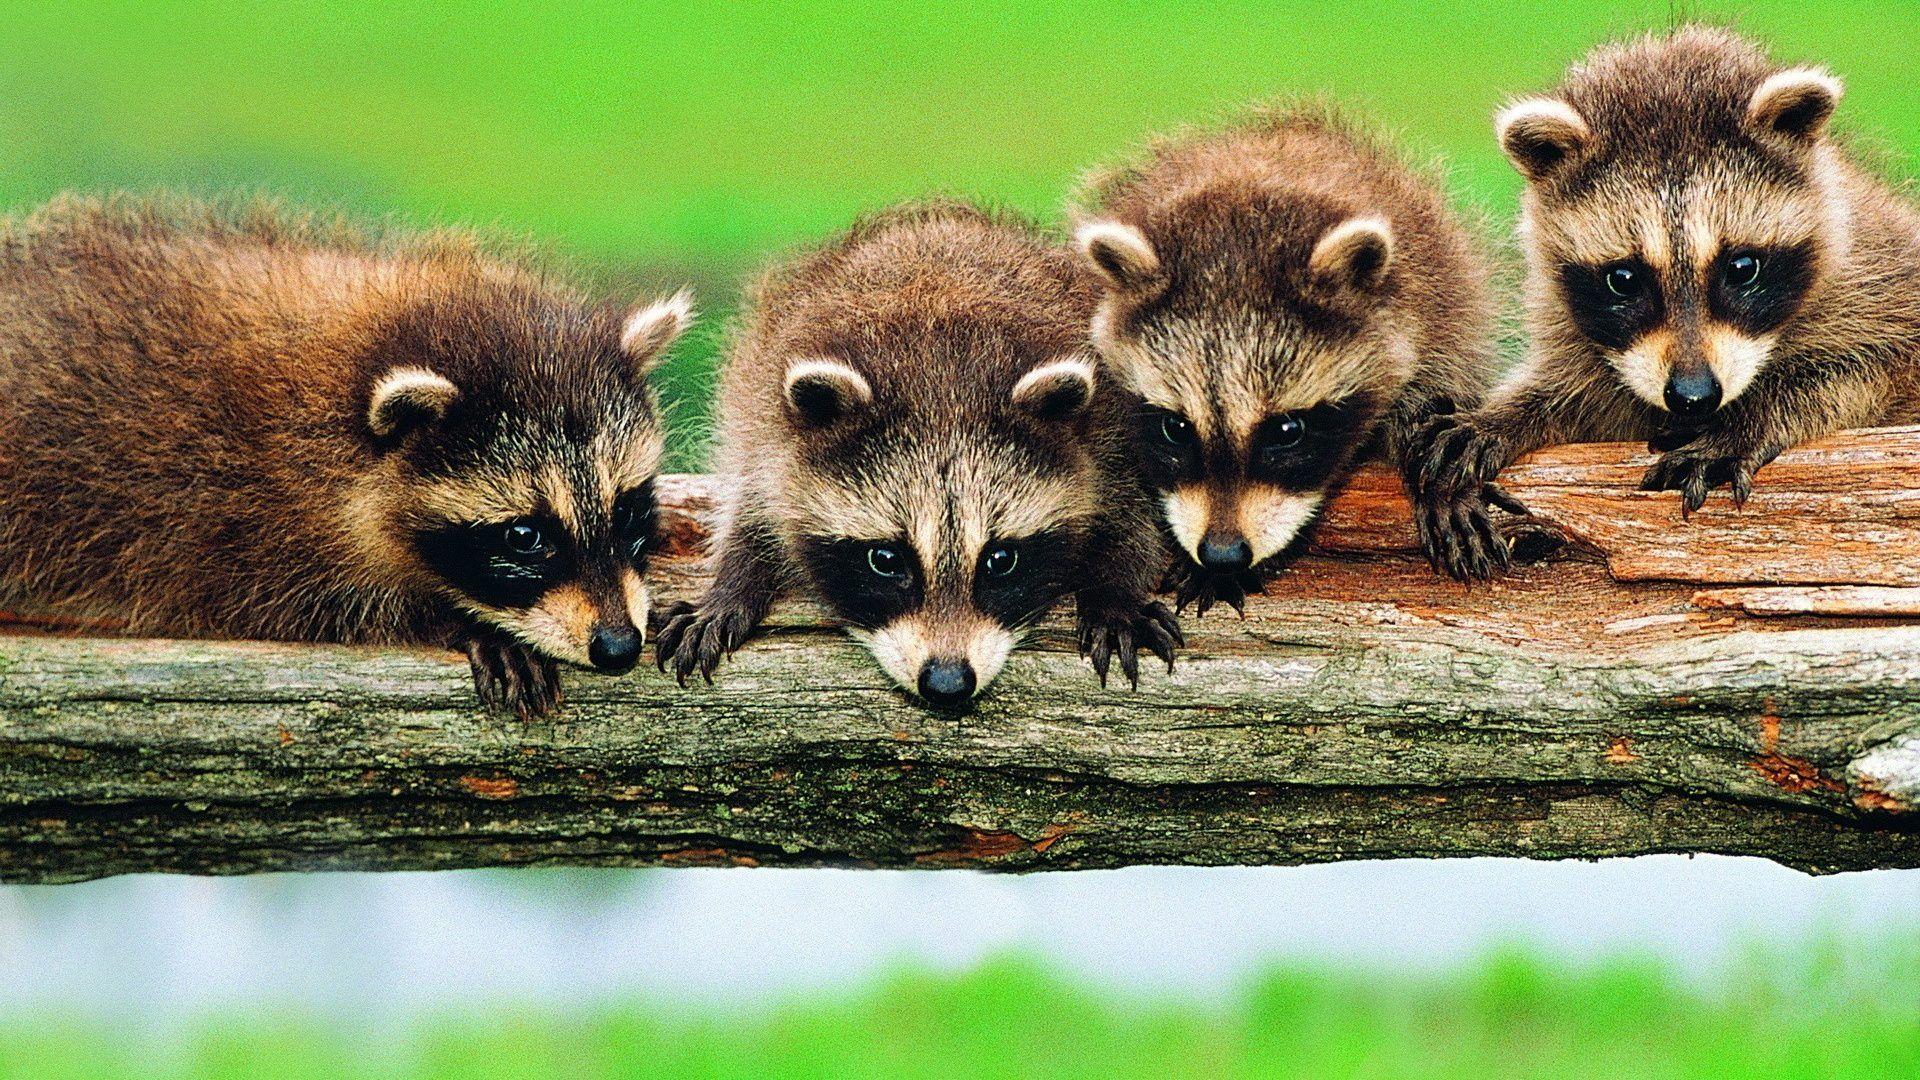 Raccoons Tag wallpapers Grass Animals Raccoons Animal Picture With